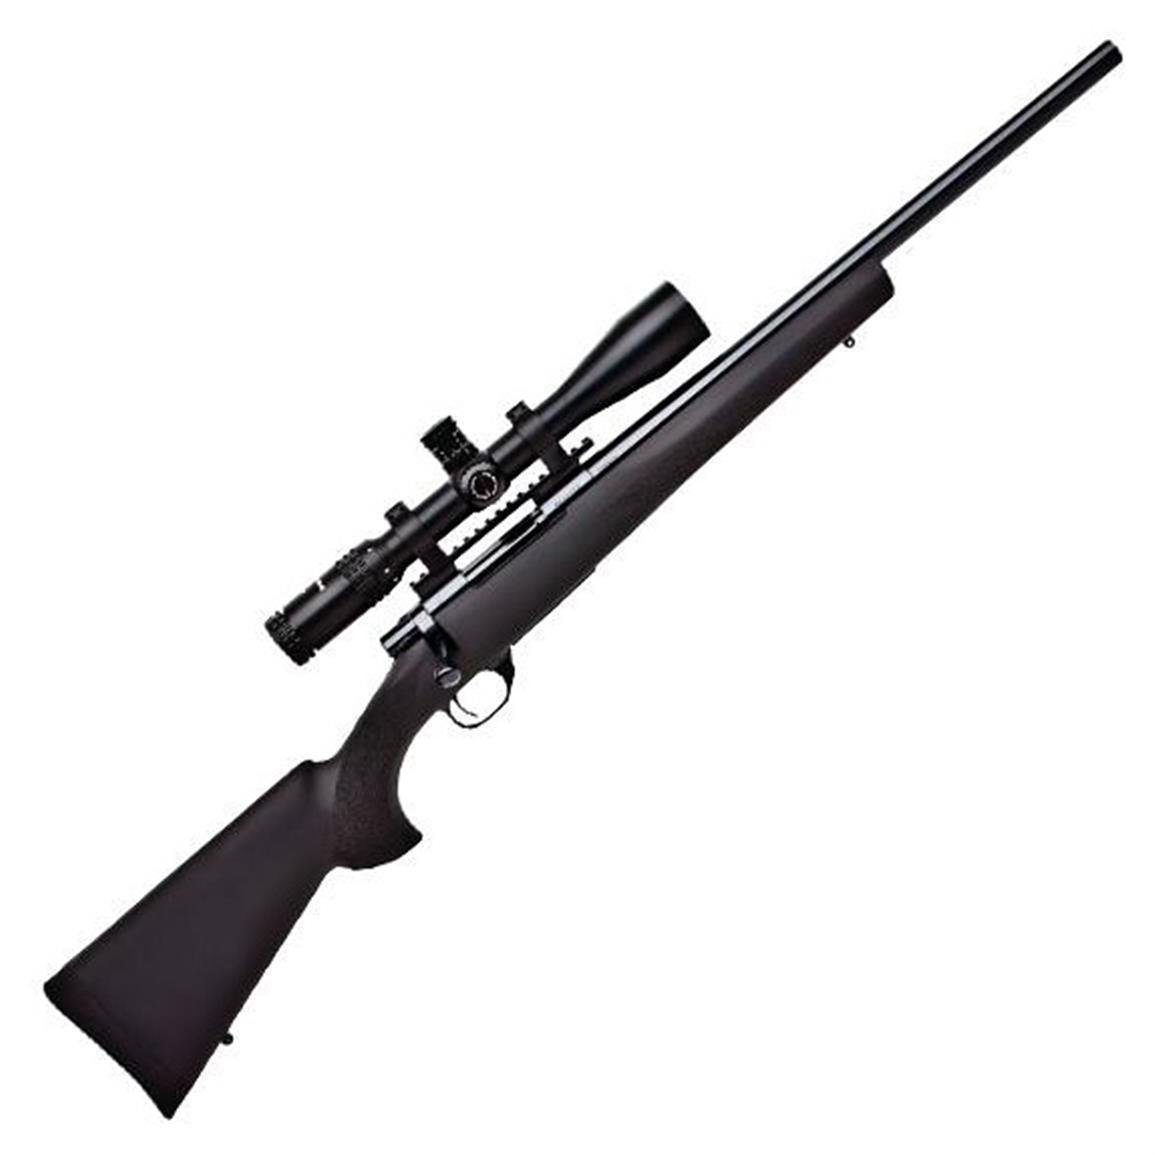 LSI Howa Hogue Targetmaster, Bolt Action, .204 Ruger, 24" Barrel, 4-16x44mm Scope, 5+1 Rounds